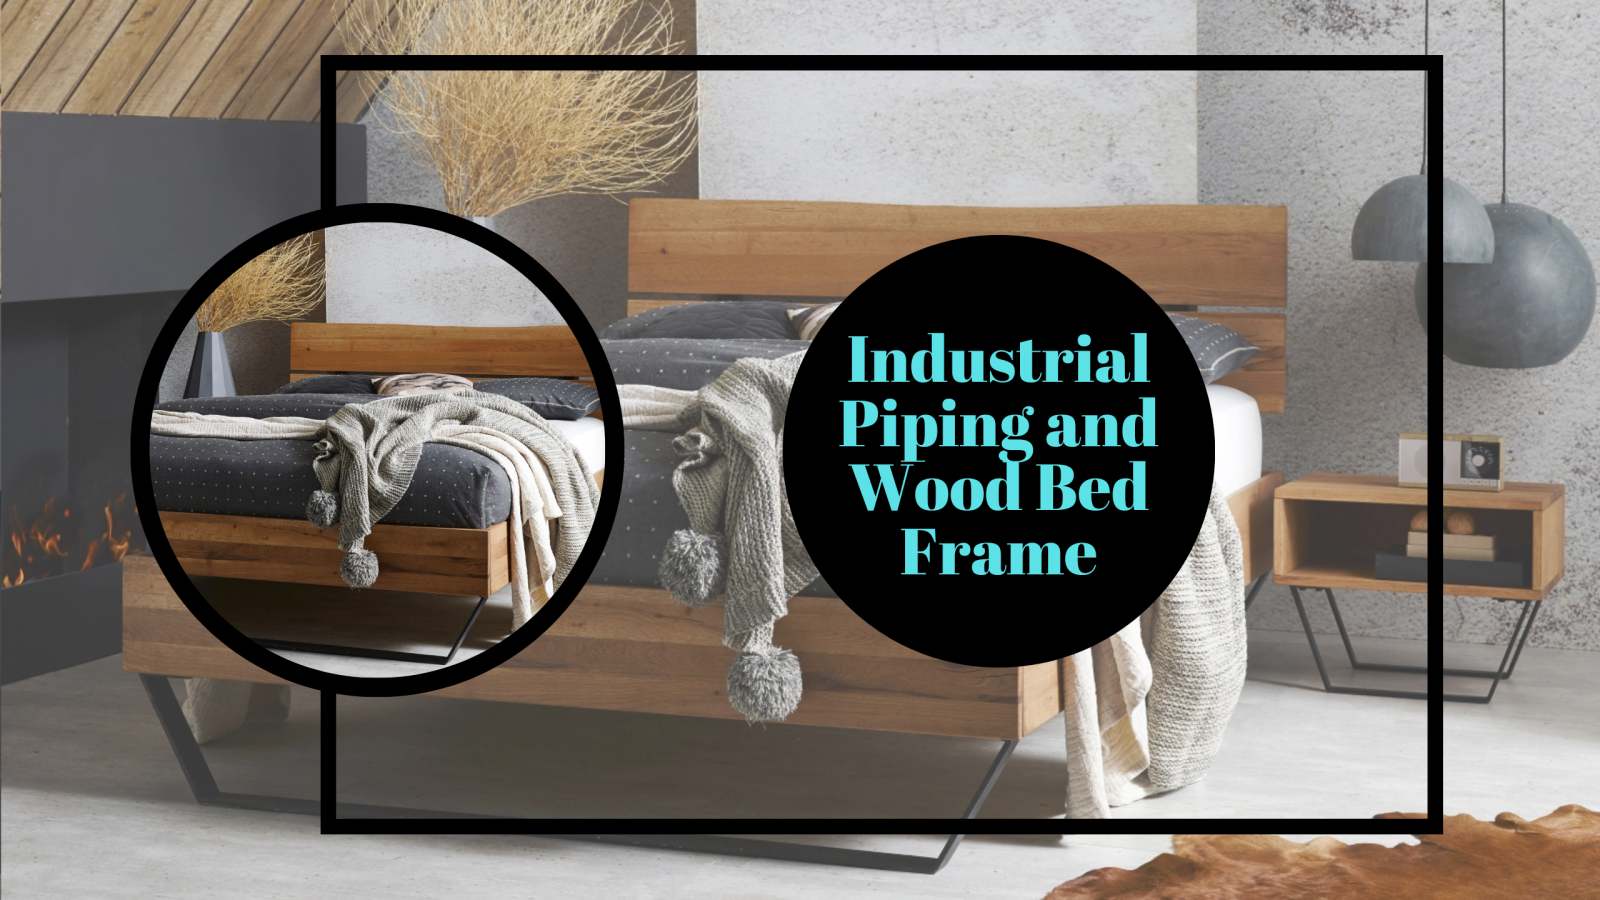 Industrial Piping and Wood Bed Frame